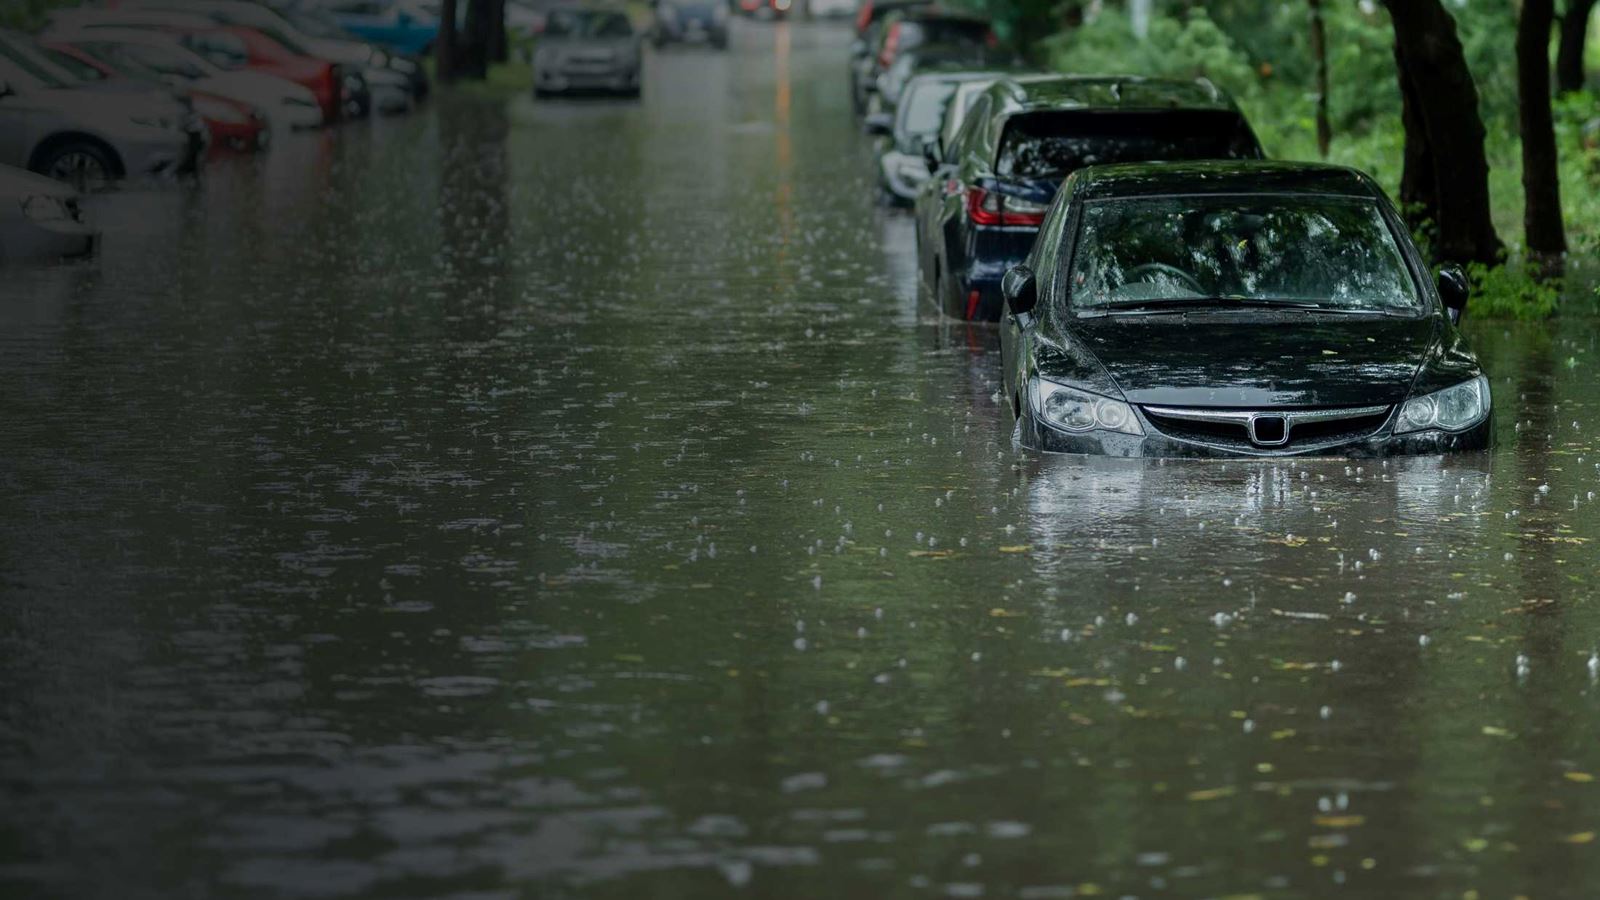 cars on a UK street half submerged in flood water from rain and storms